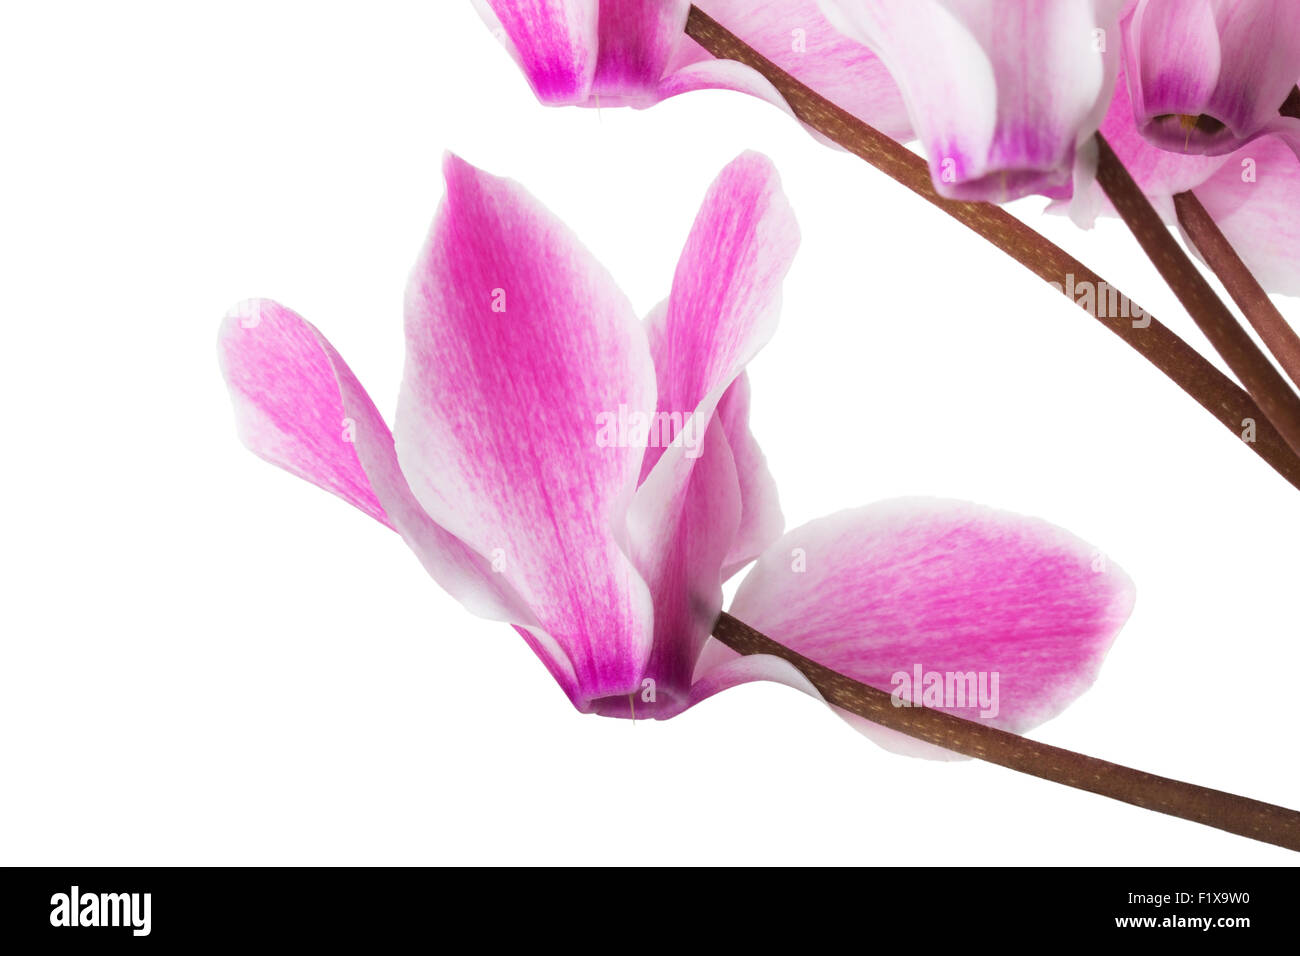 cyclamen flower on a white background. Stock Photo